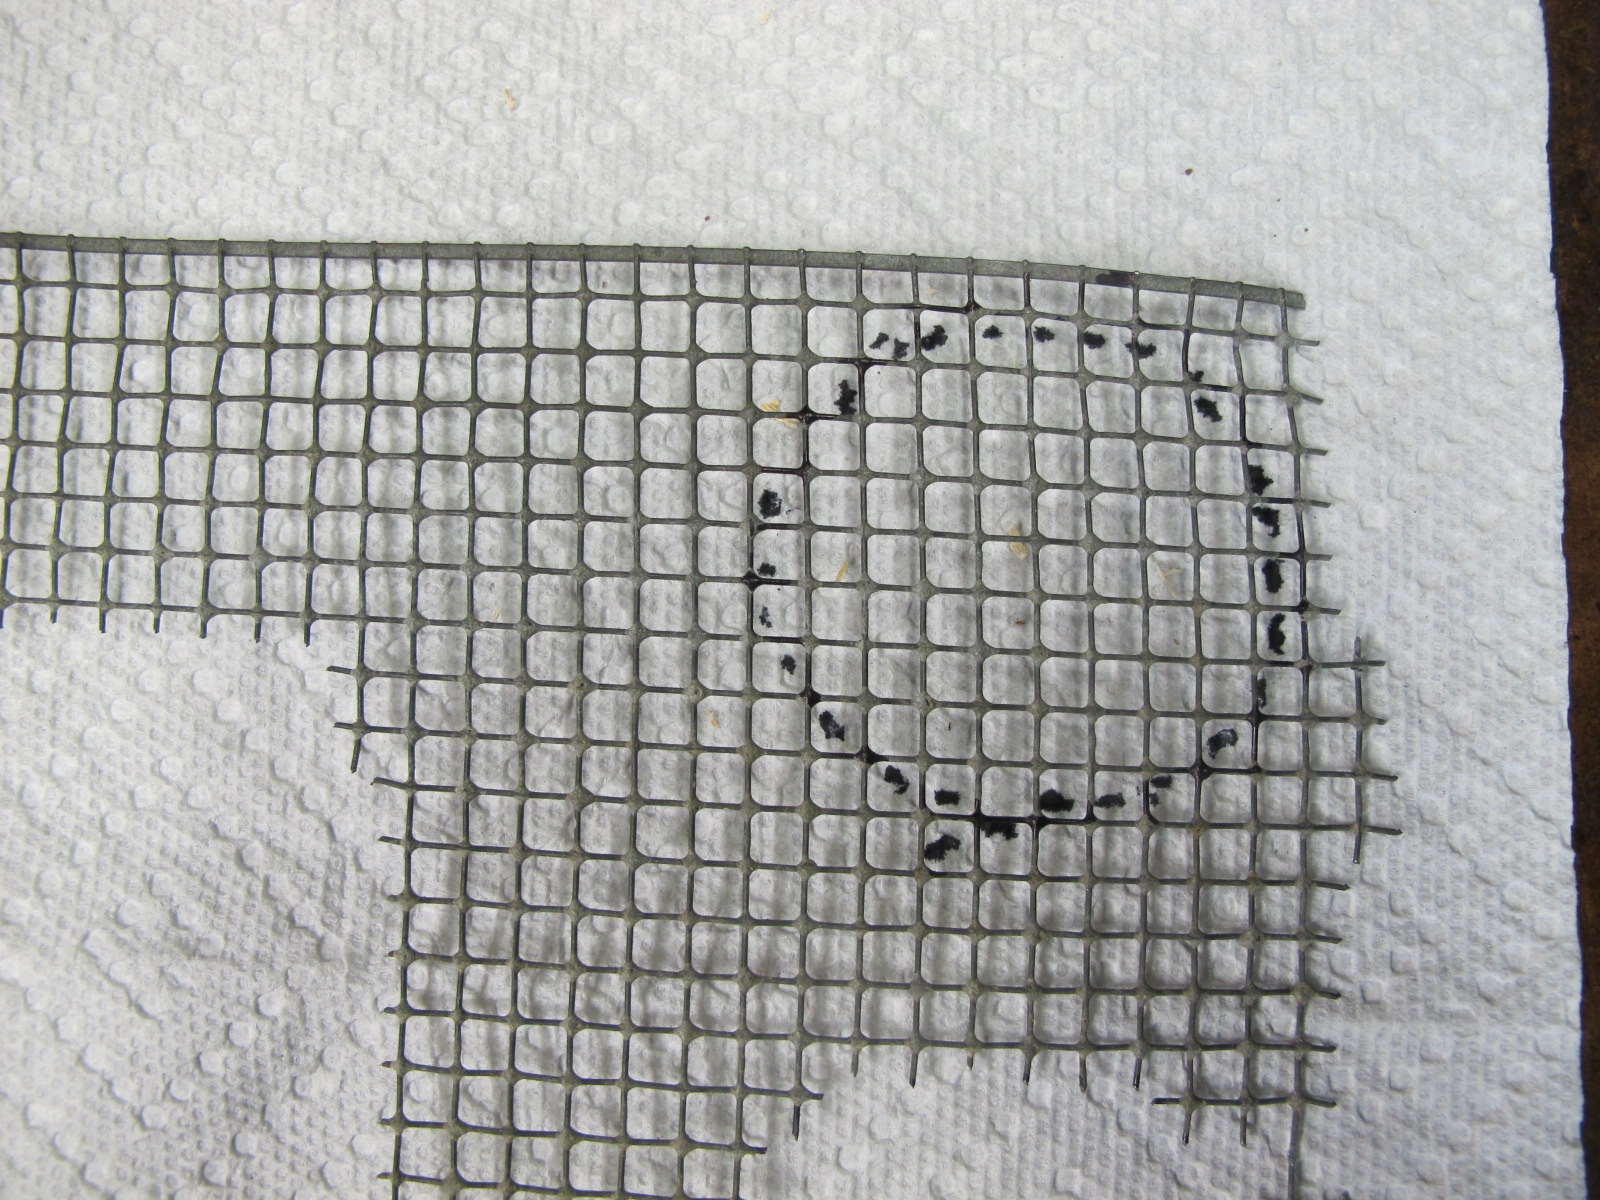  Cut out patter on wire mesh. 